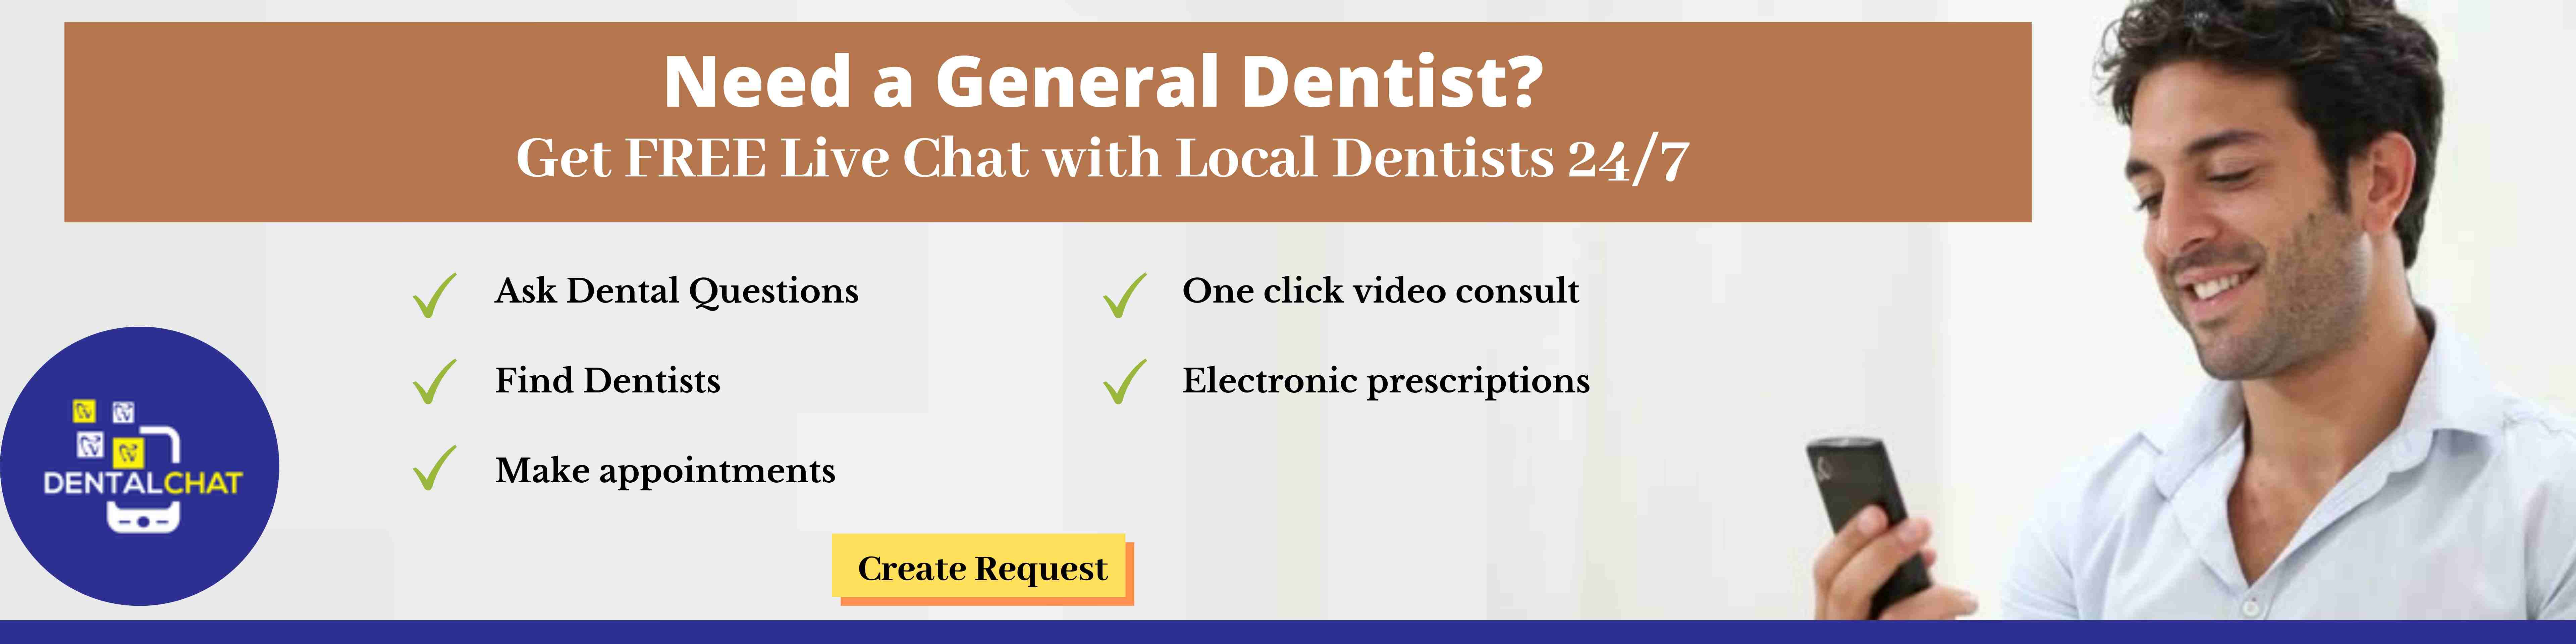 Dental Specialties Chat about General Dentistry, What is a General Dentistry and Different types of Dental Specialities?